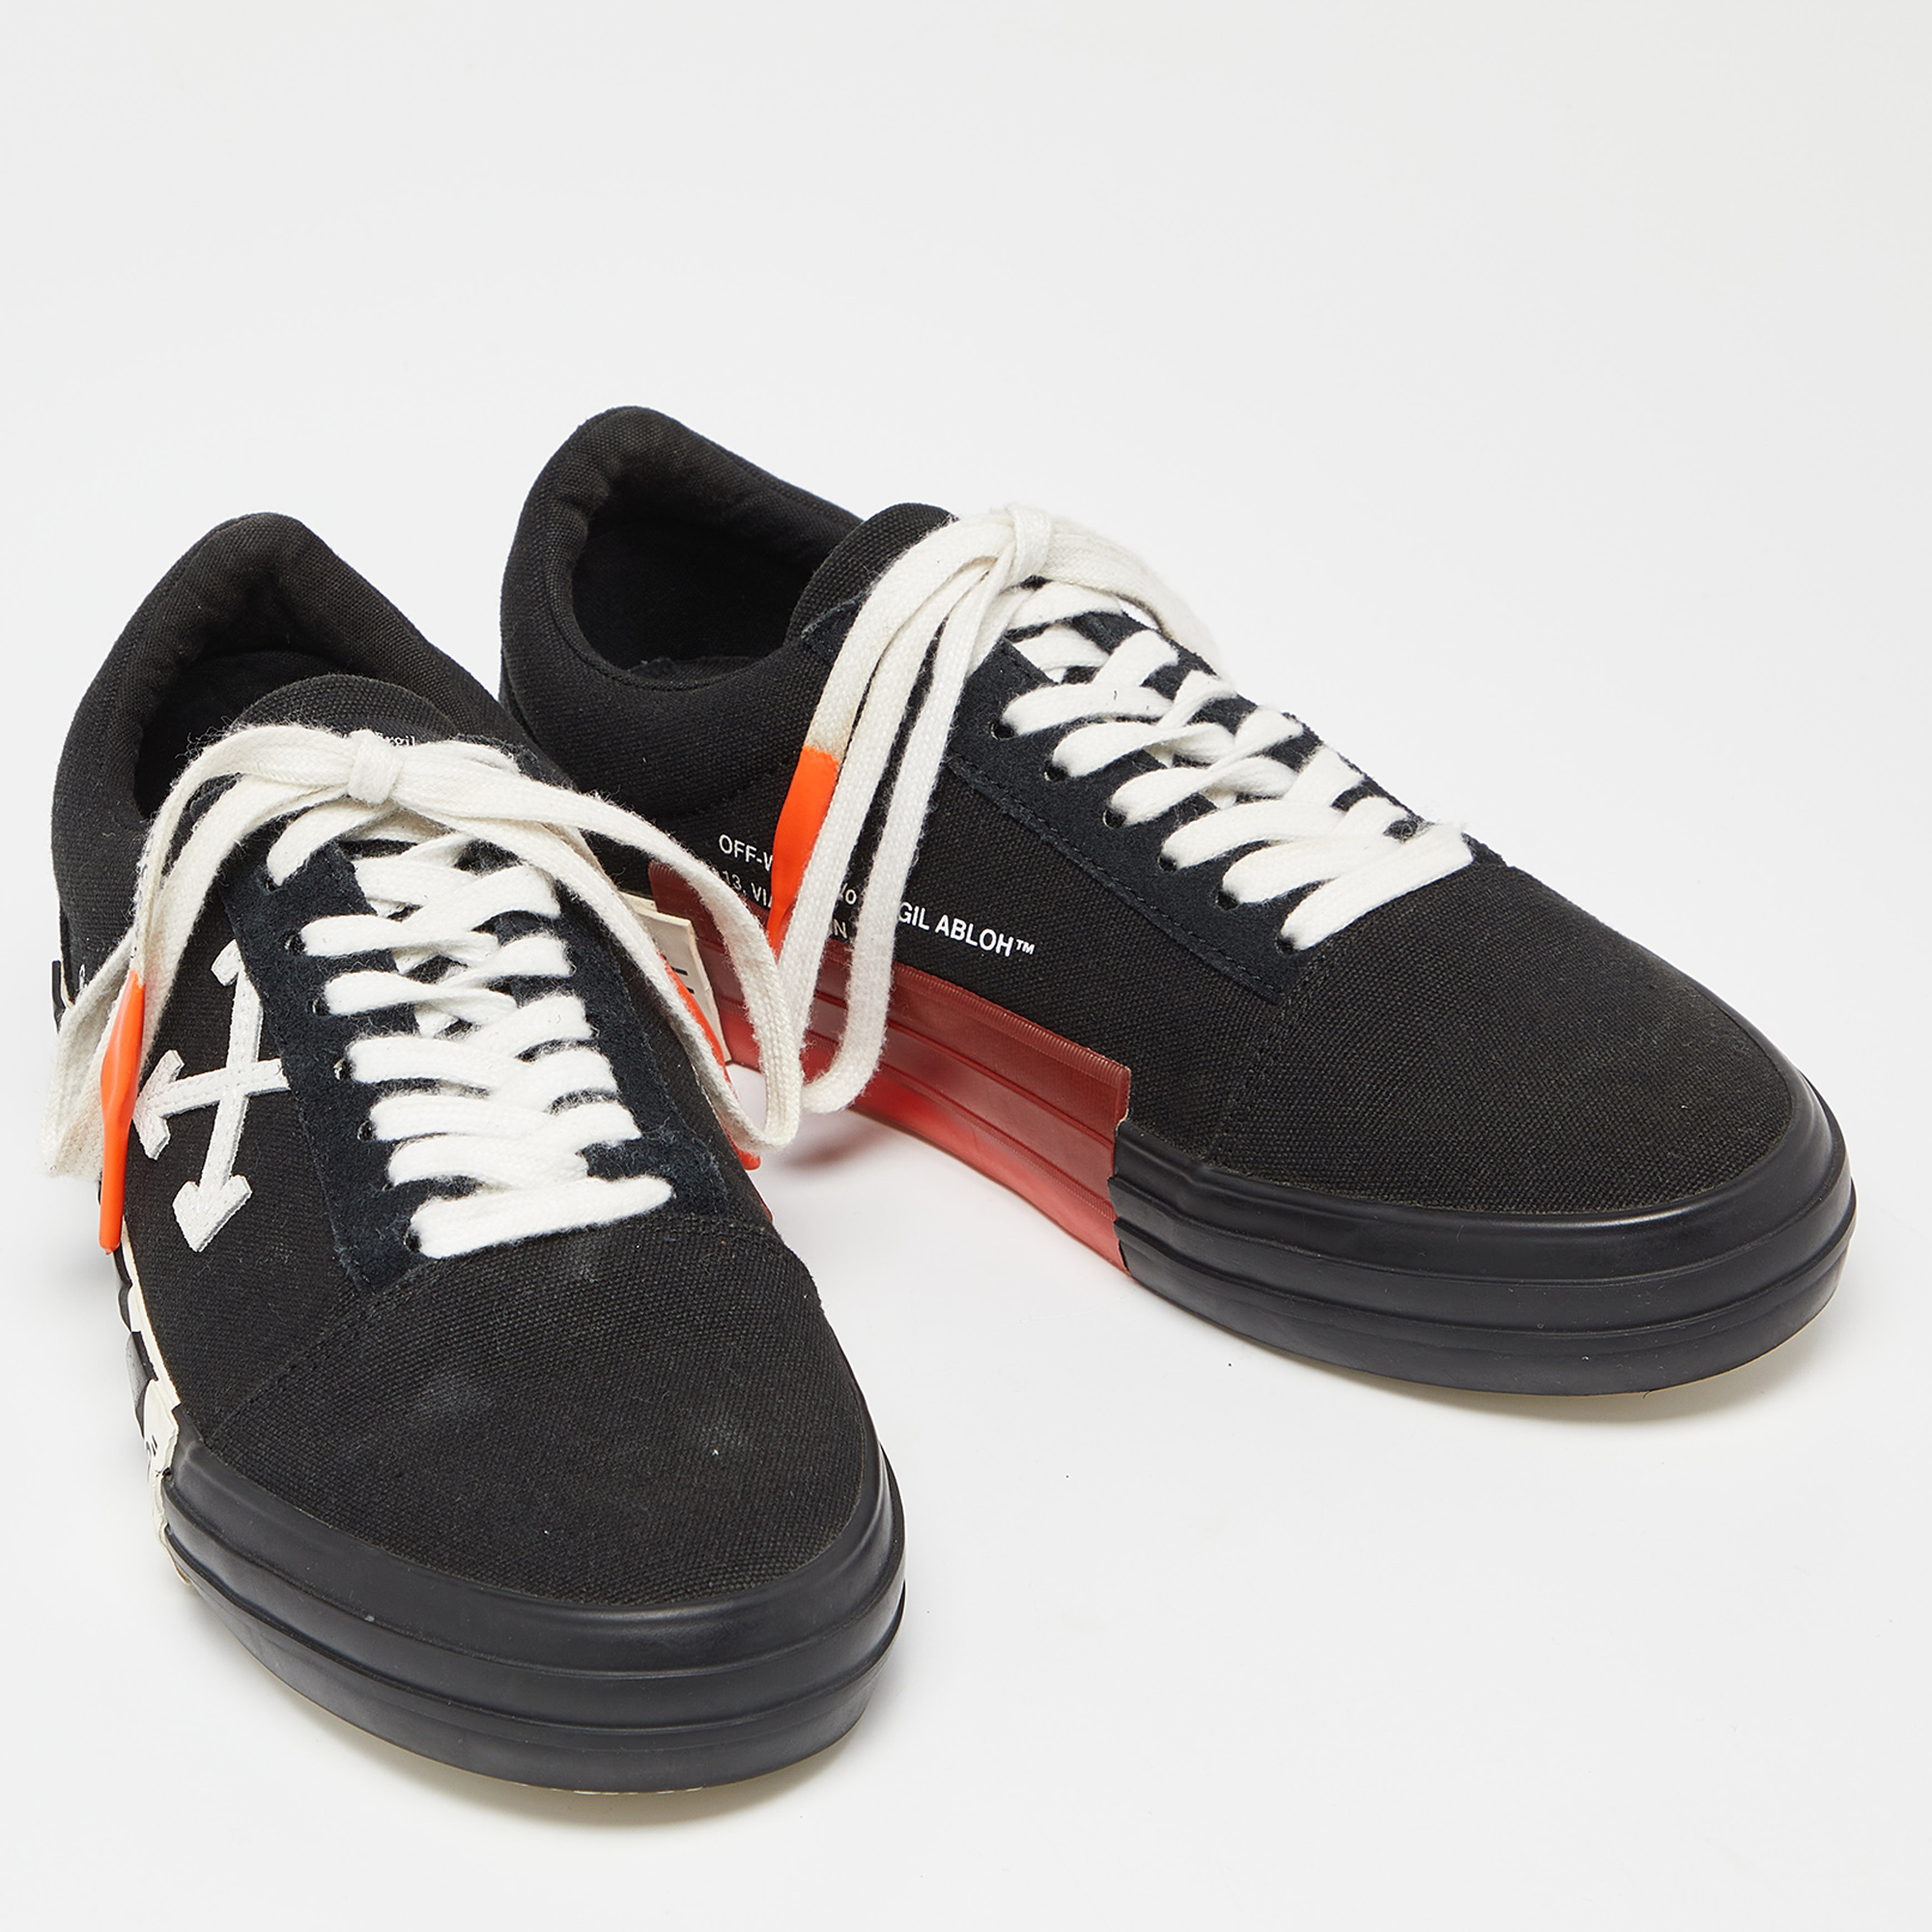 Off-White Black Canvas Vulcanized Striped Low Top Sneakers Size 41